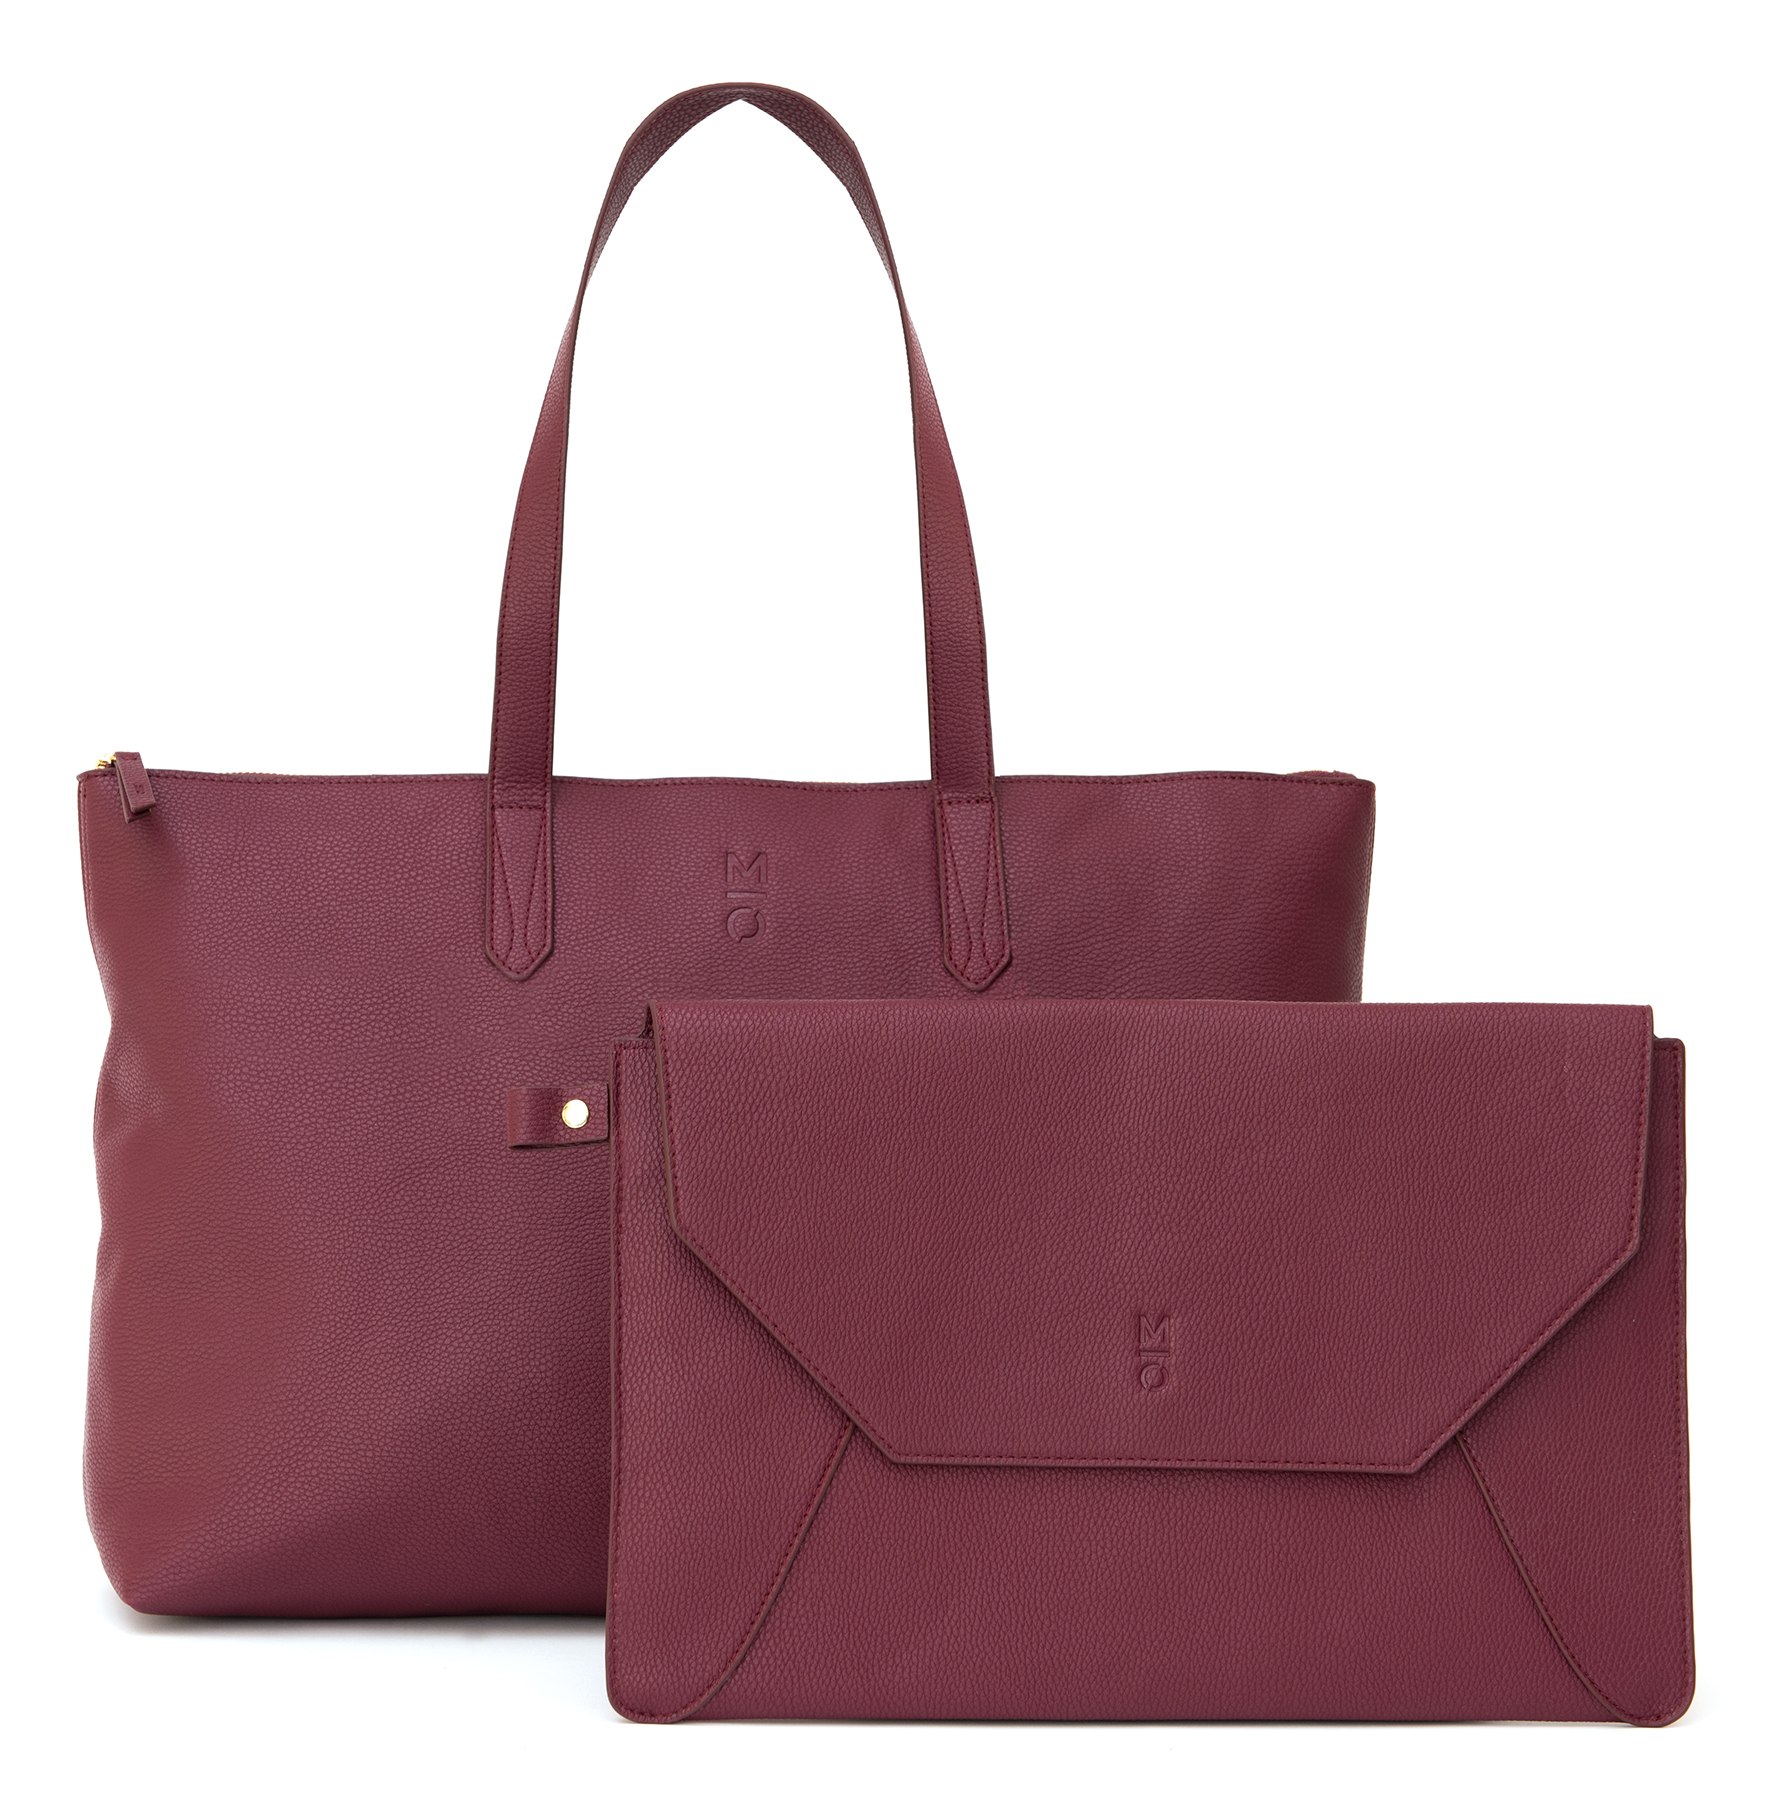 MOTILE Vegan Leather Commuter Laptop Tote with 10,000 mAh Qi Certified Wireless Powerbank, Cabernet - image 1 of 8